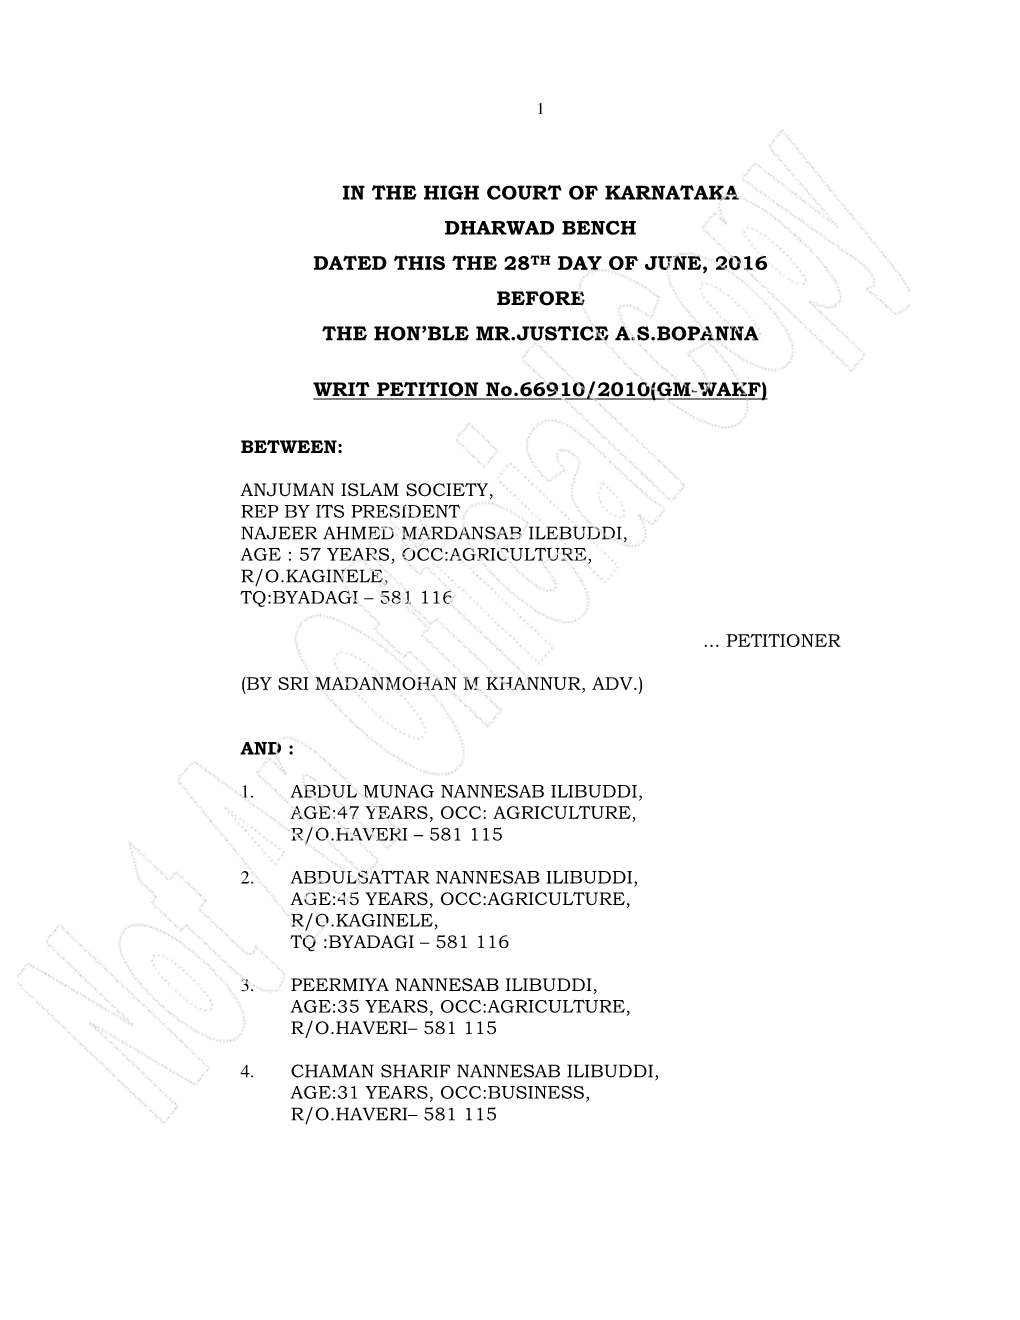 In the High Court of Karnataka Dharwad Bench Dated This the 28Th Day of June, 2016 Before the Hon'ble Mr.Justice A.S.Bopanna W